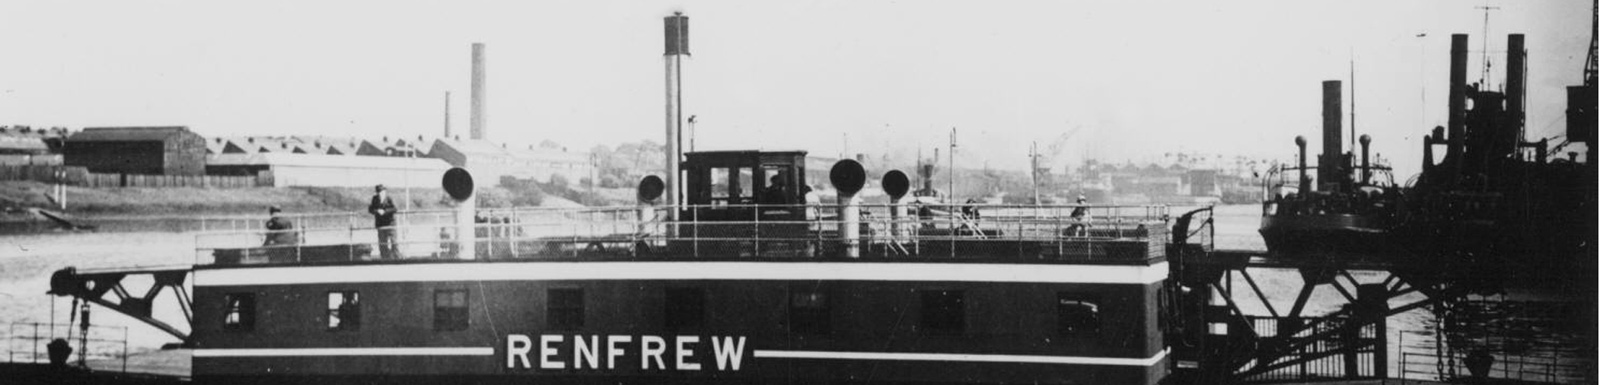 The Renfrew Ferry of old, image courtesy Culture & Sport Glasgow/Mitchell Library